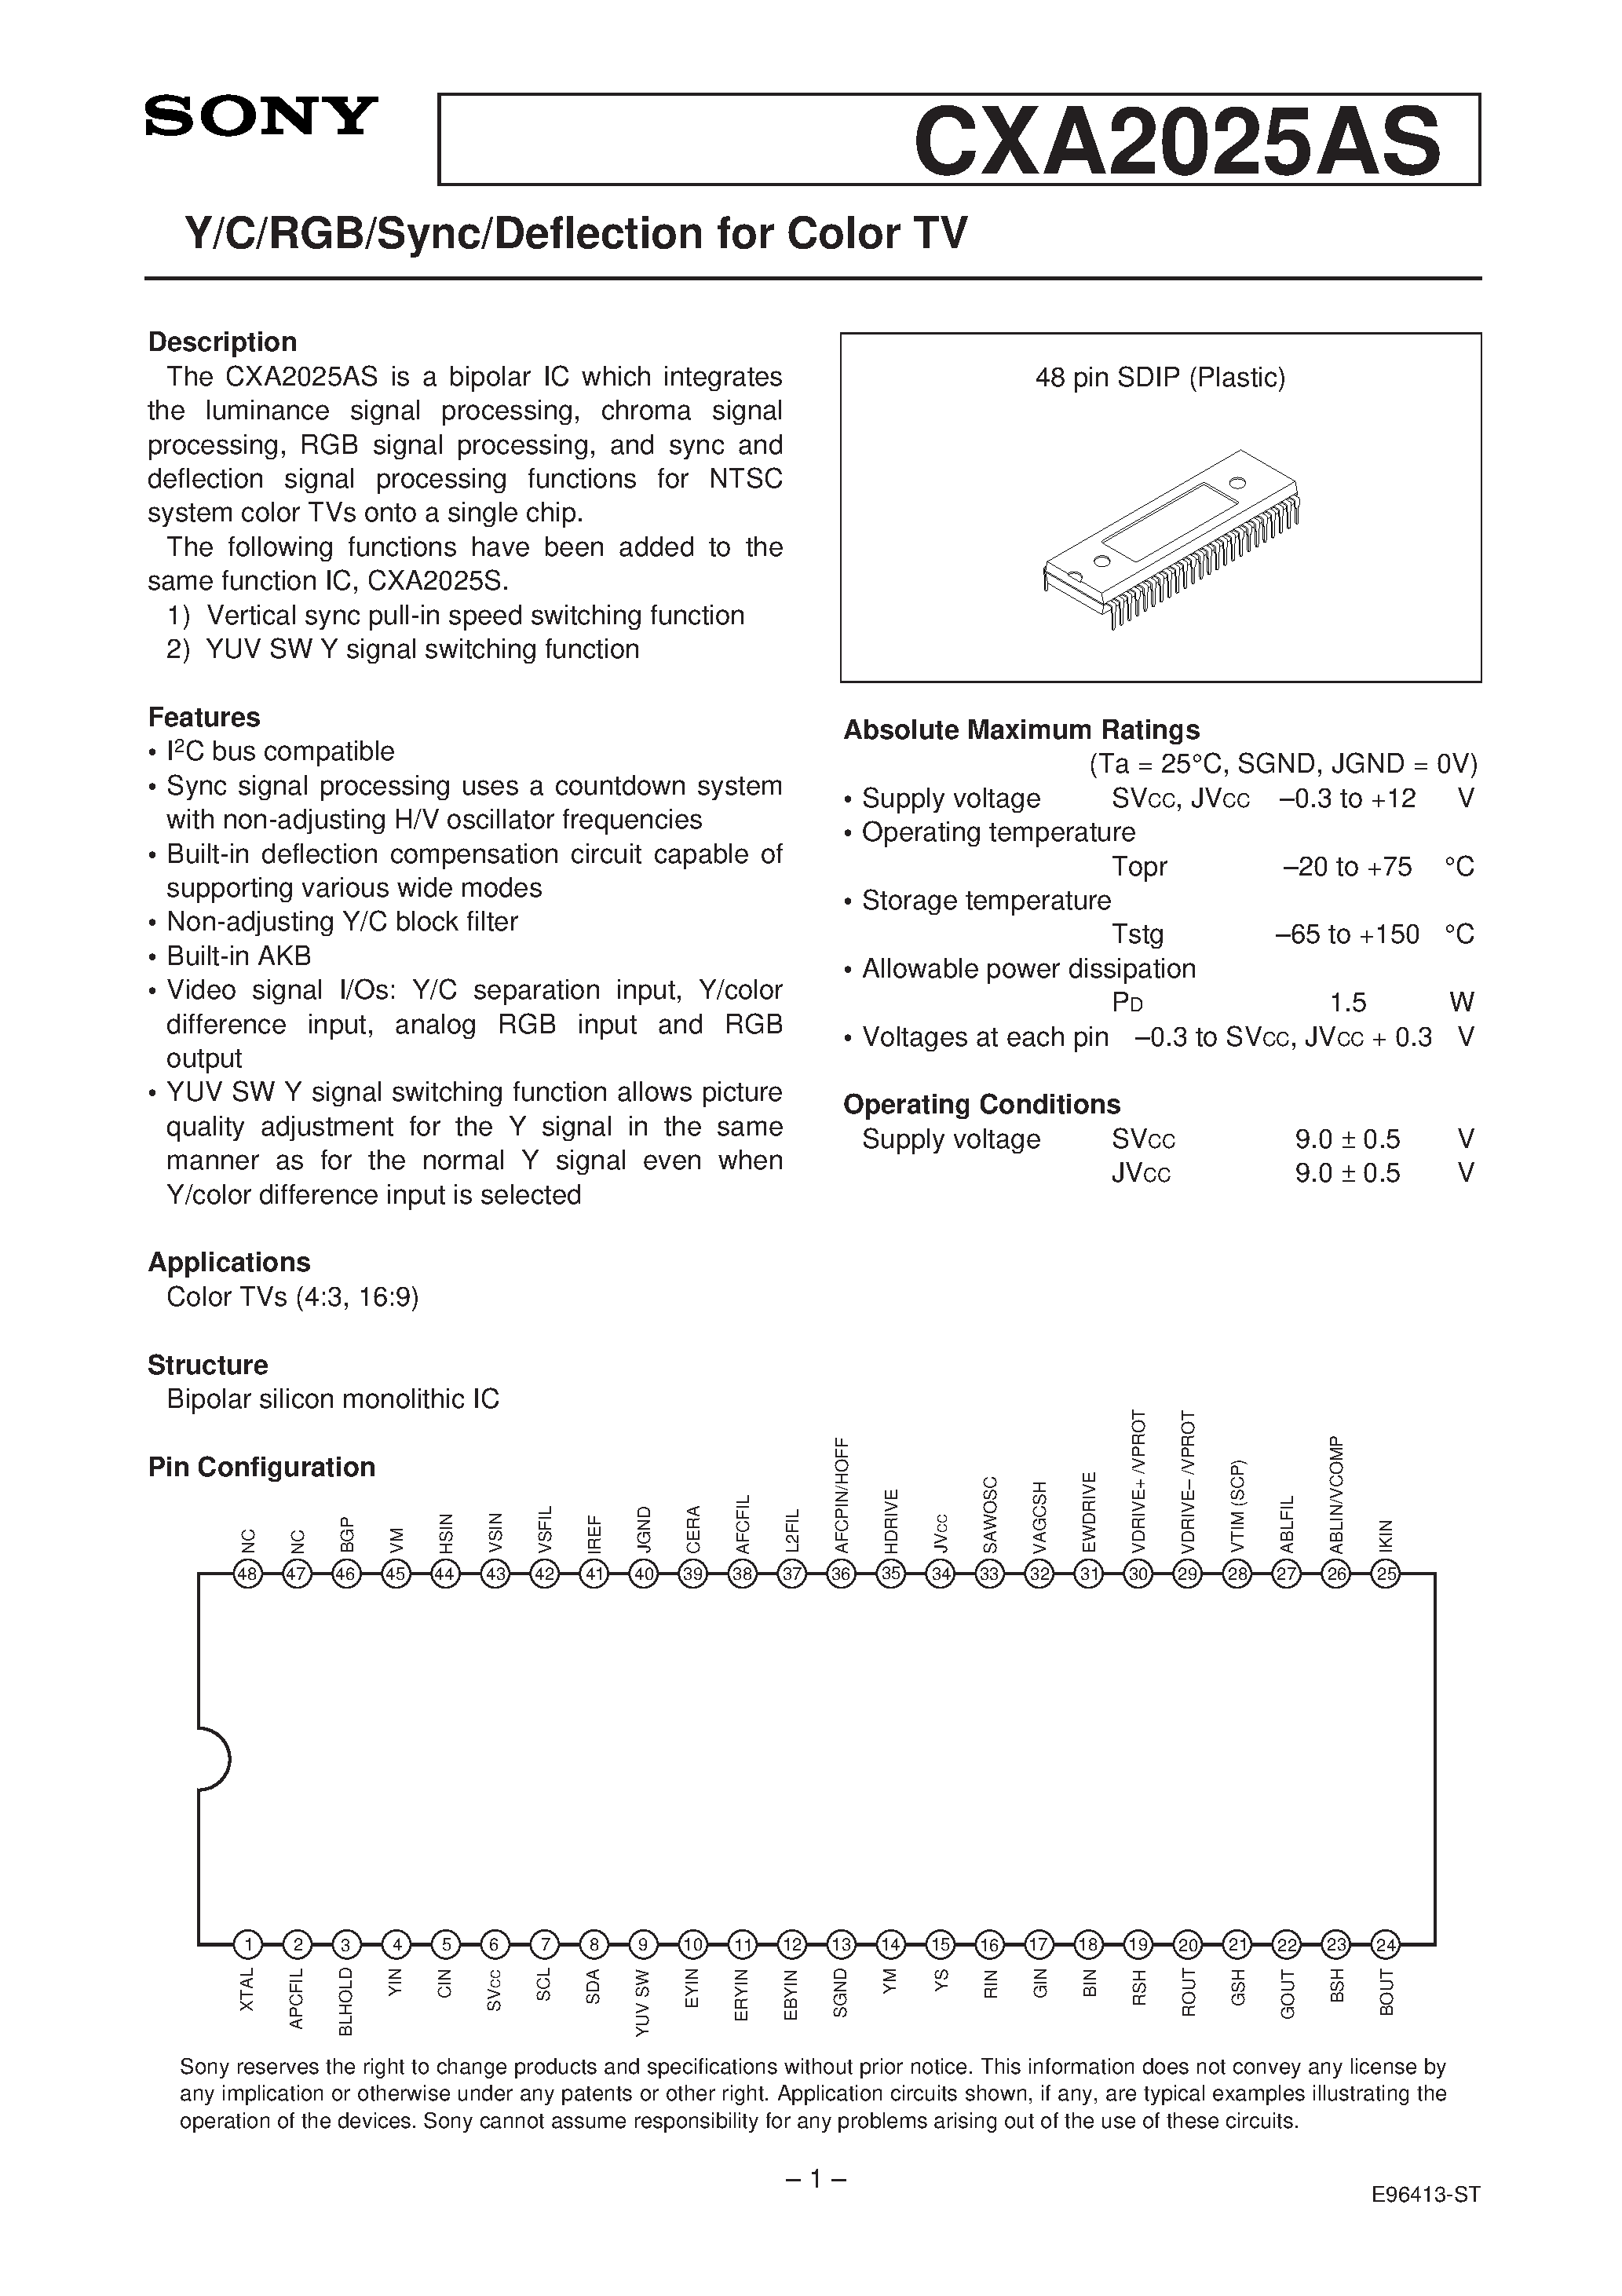 Datasheet CXA2025AS - Y/C/RGB/Sync/Deflection for Color TV page 1